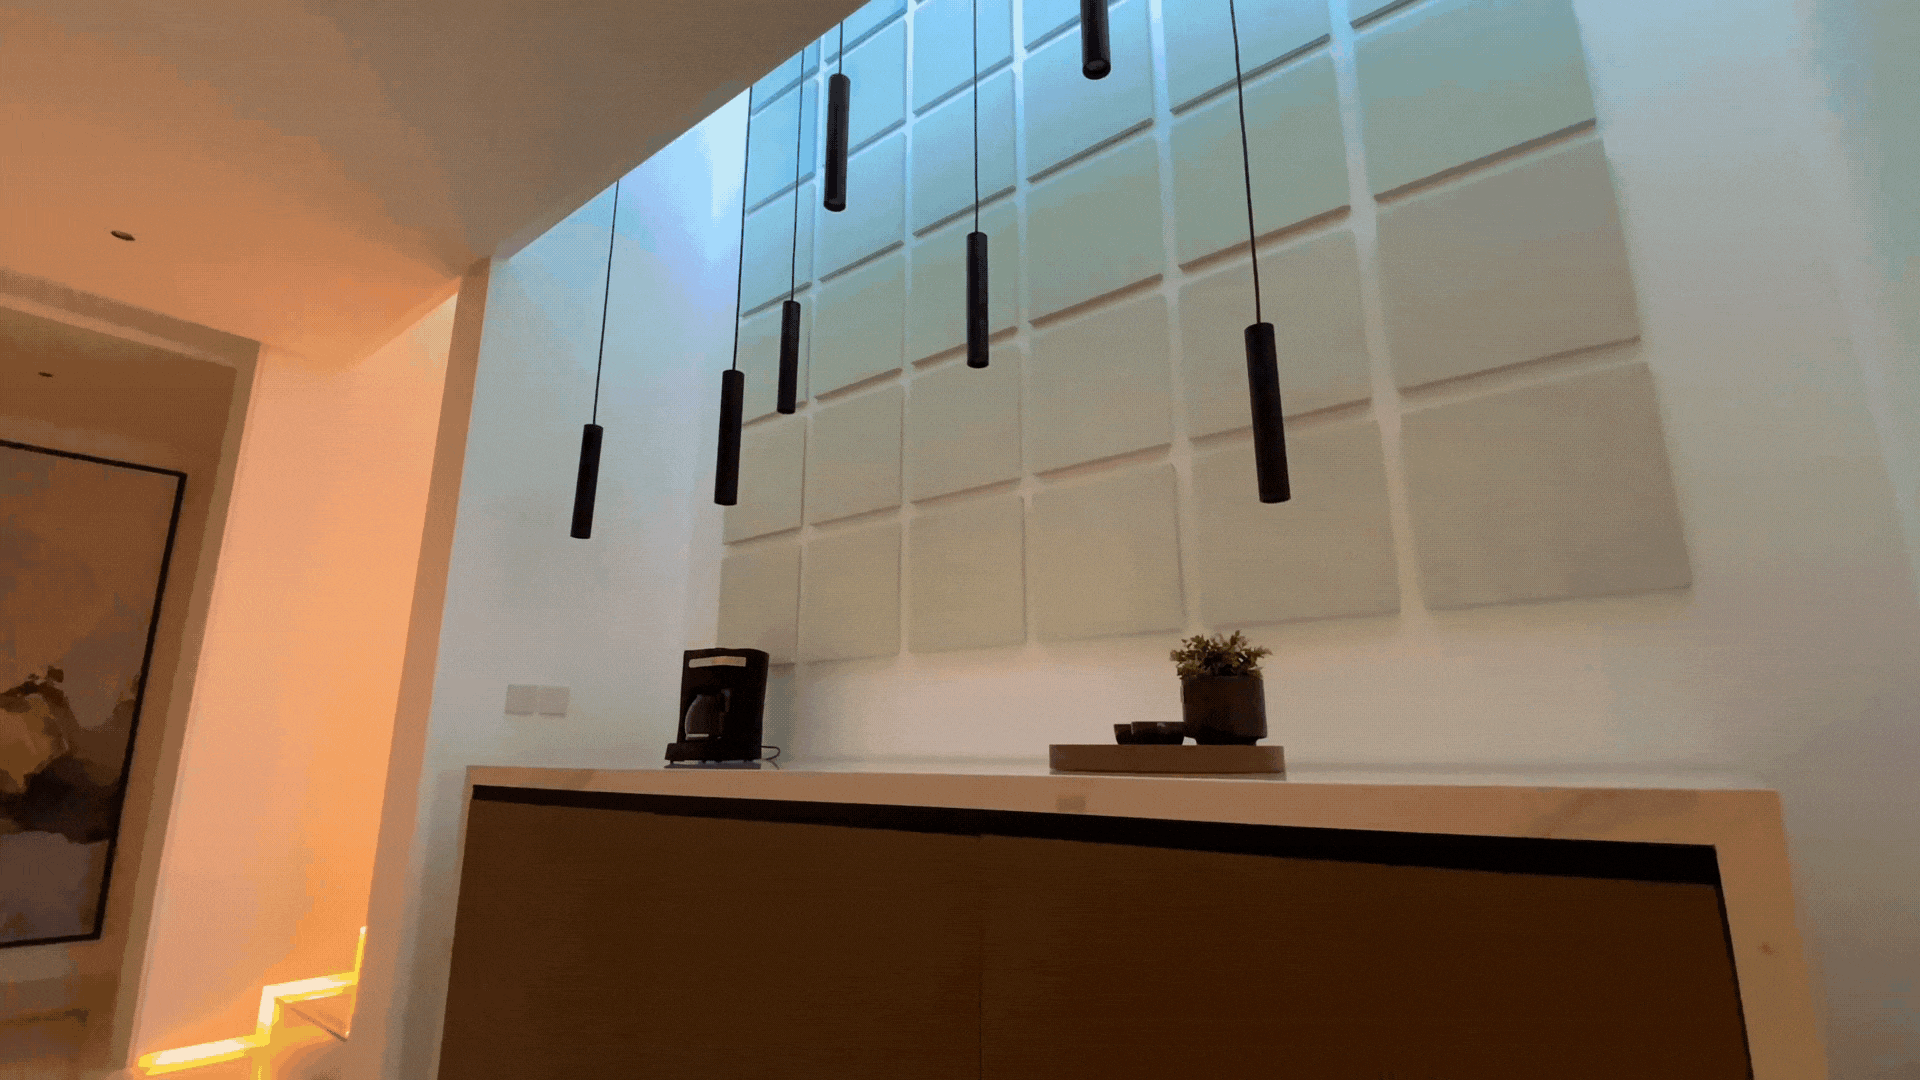 gif showcasing automated lighting system turning them on and off